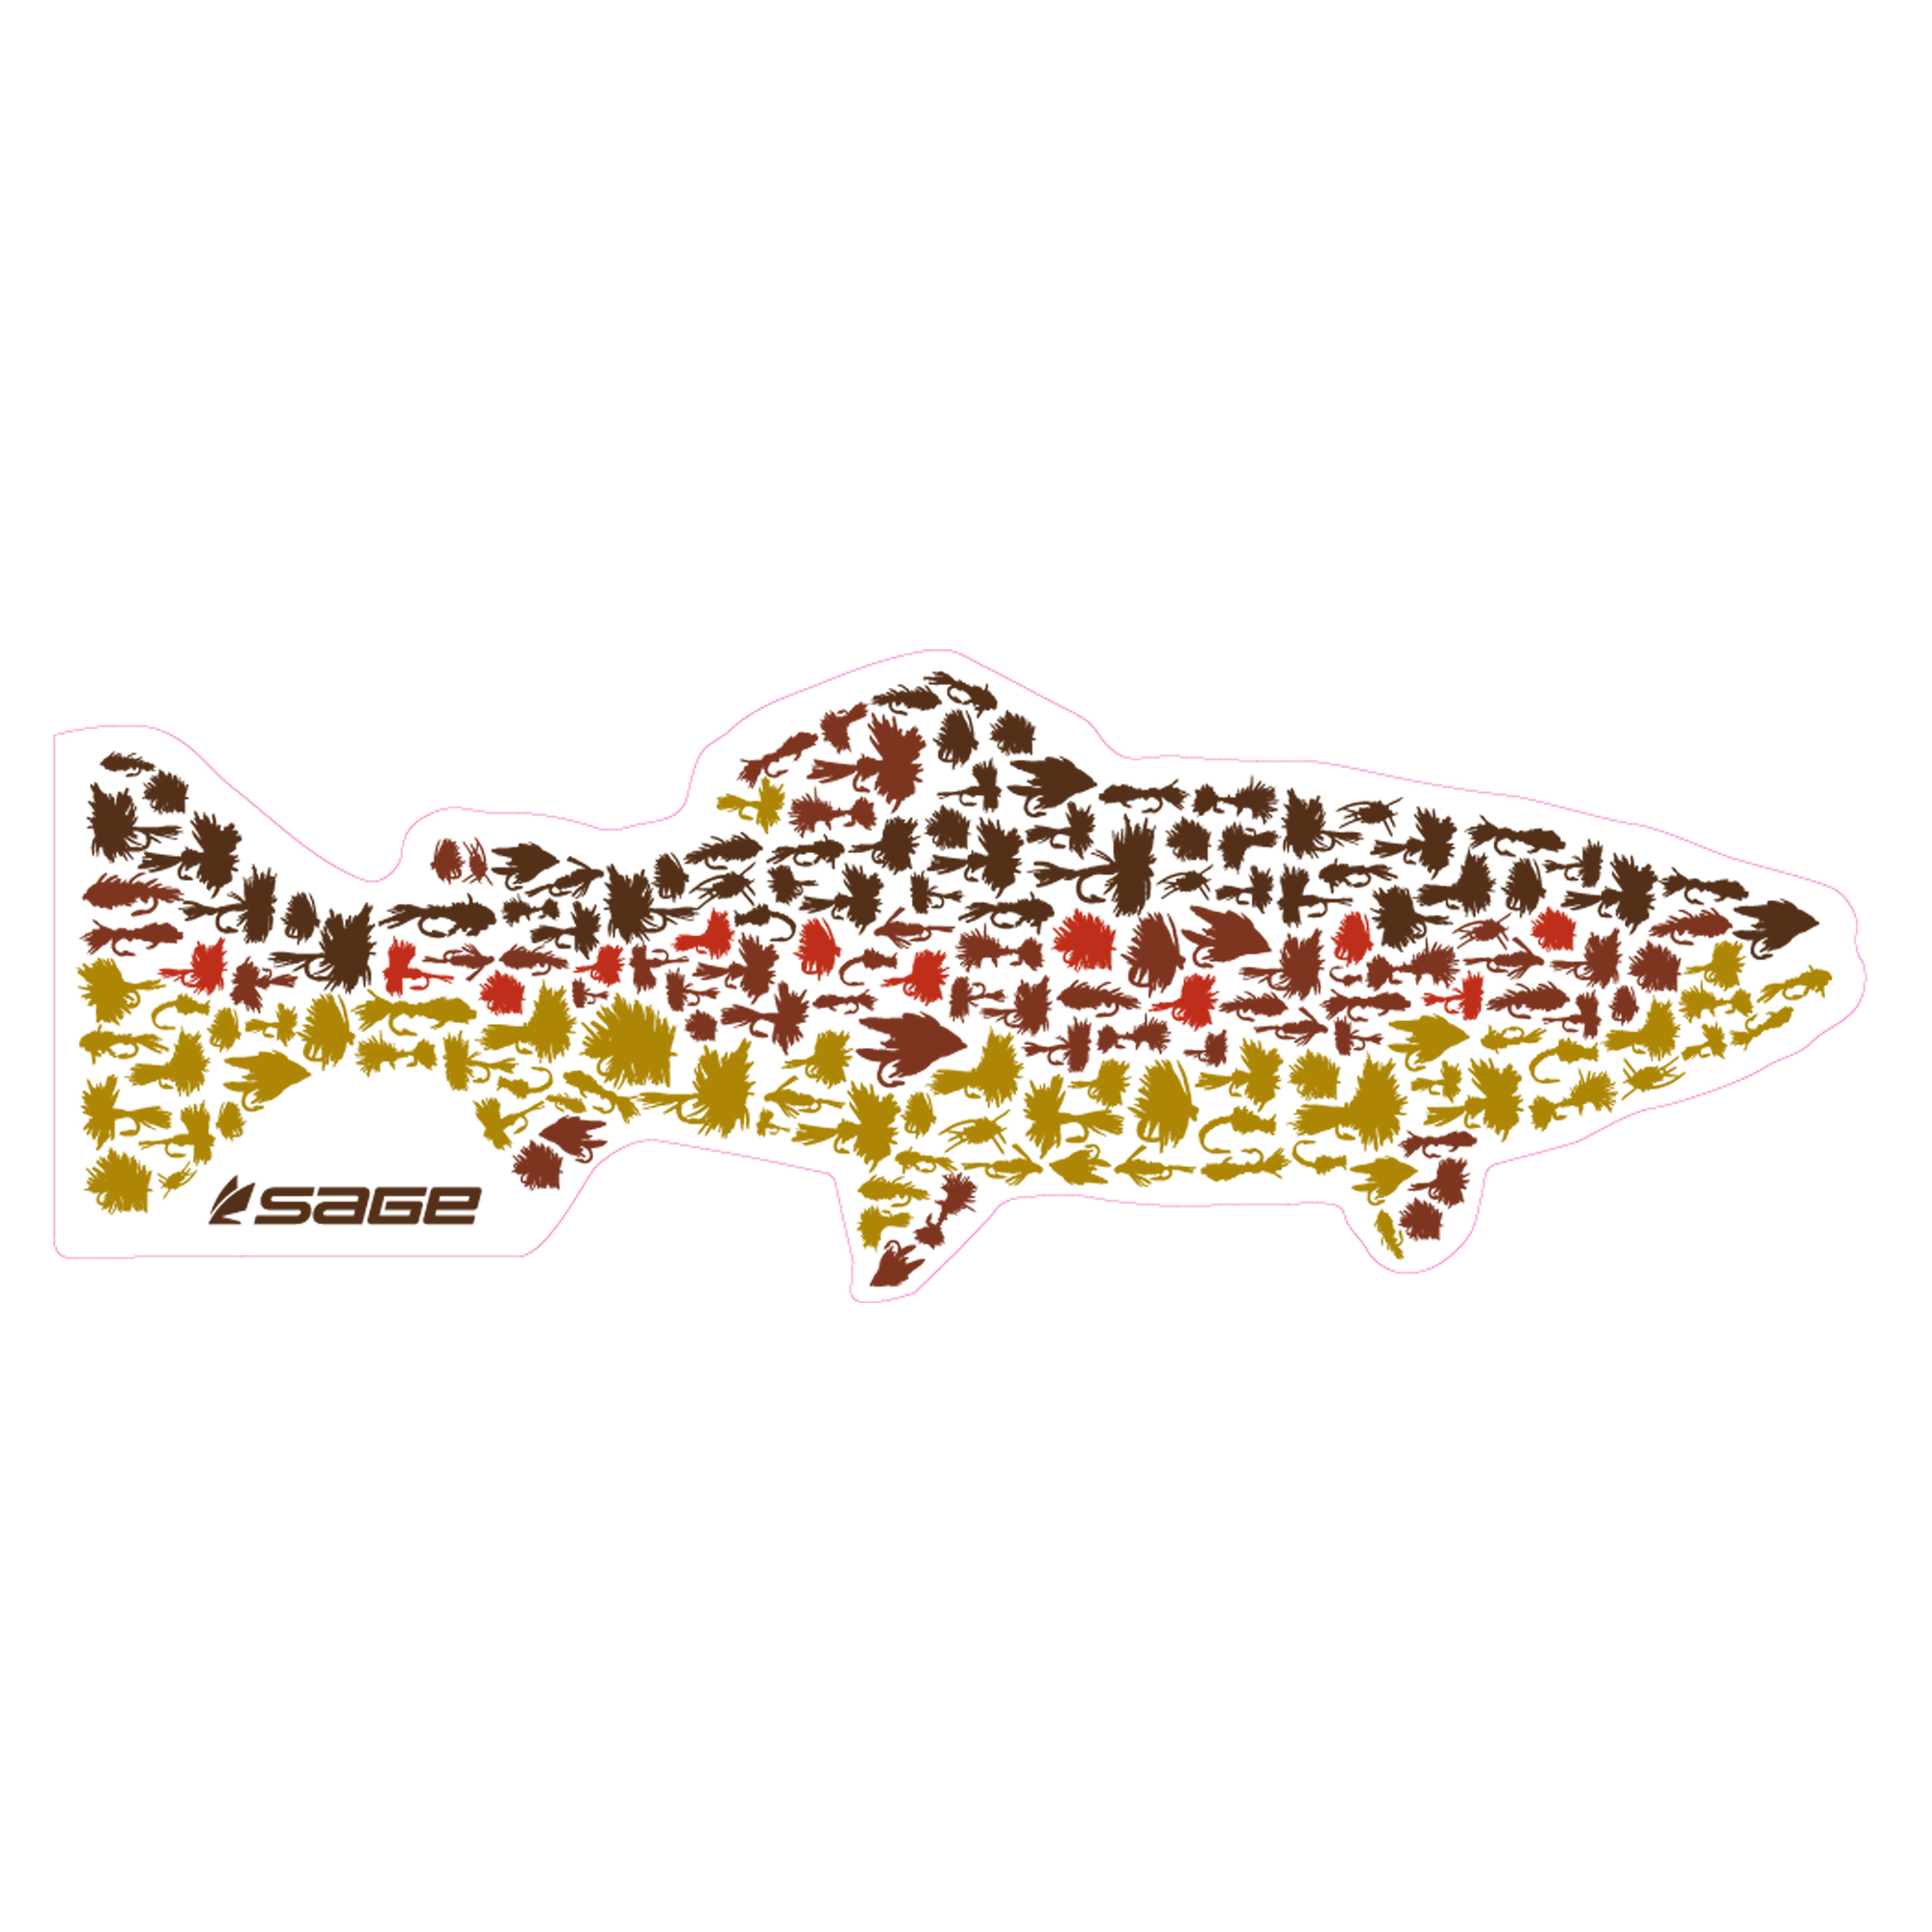 Fly Vinyl Decal, Fly Fishing Decal, Fly Fishing Vinyl Sticker, Fly Fishing  Sticker, Fly Fishing Window Decal, Fly Fishing, Fly Decal, Fly 